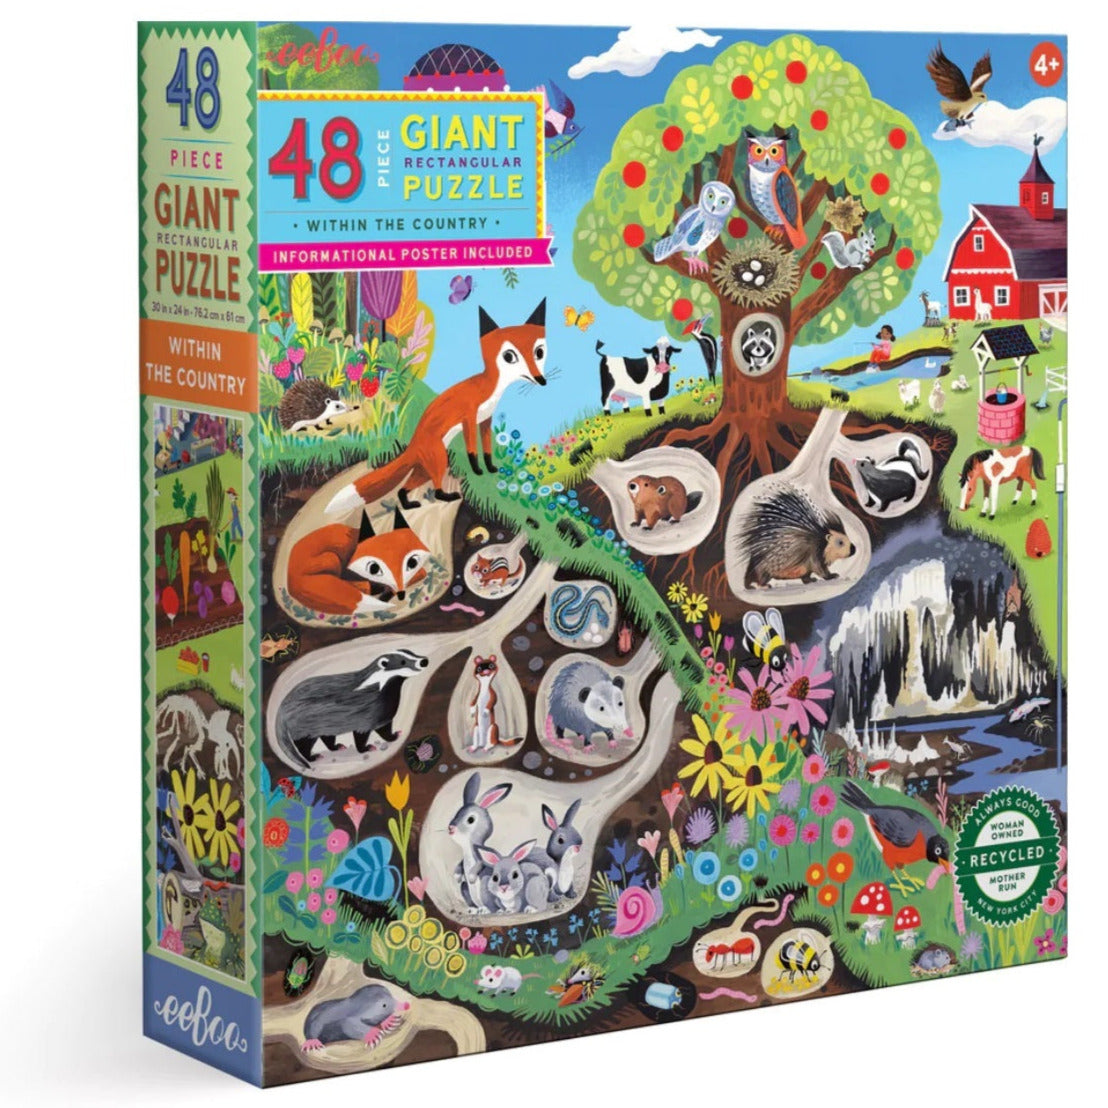 Within the Country Giant 48 Piece Puzzle